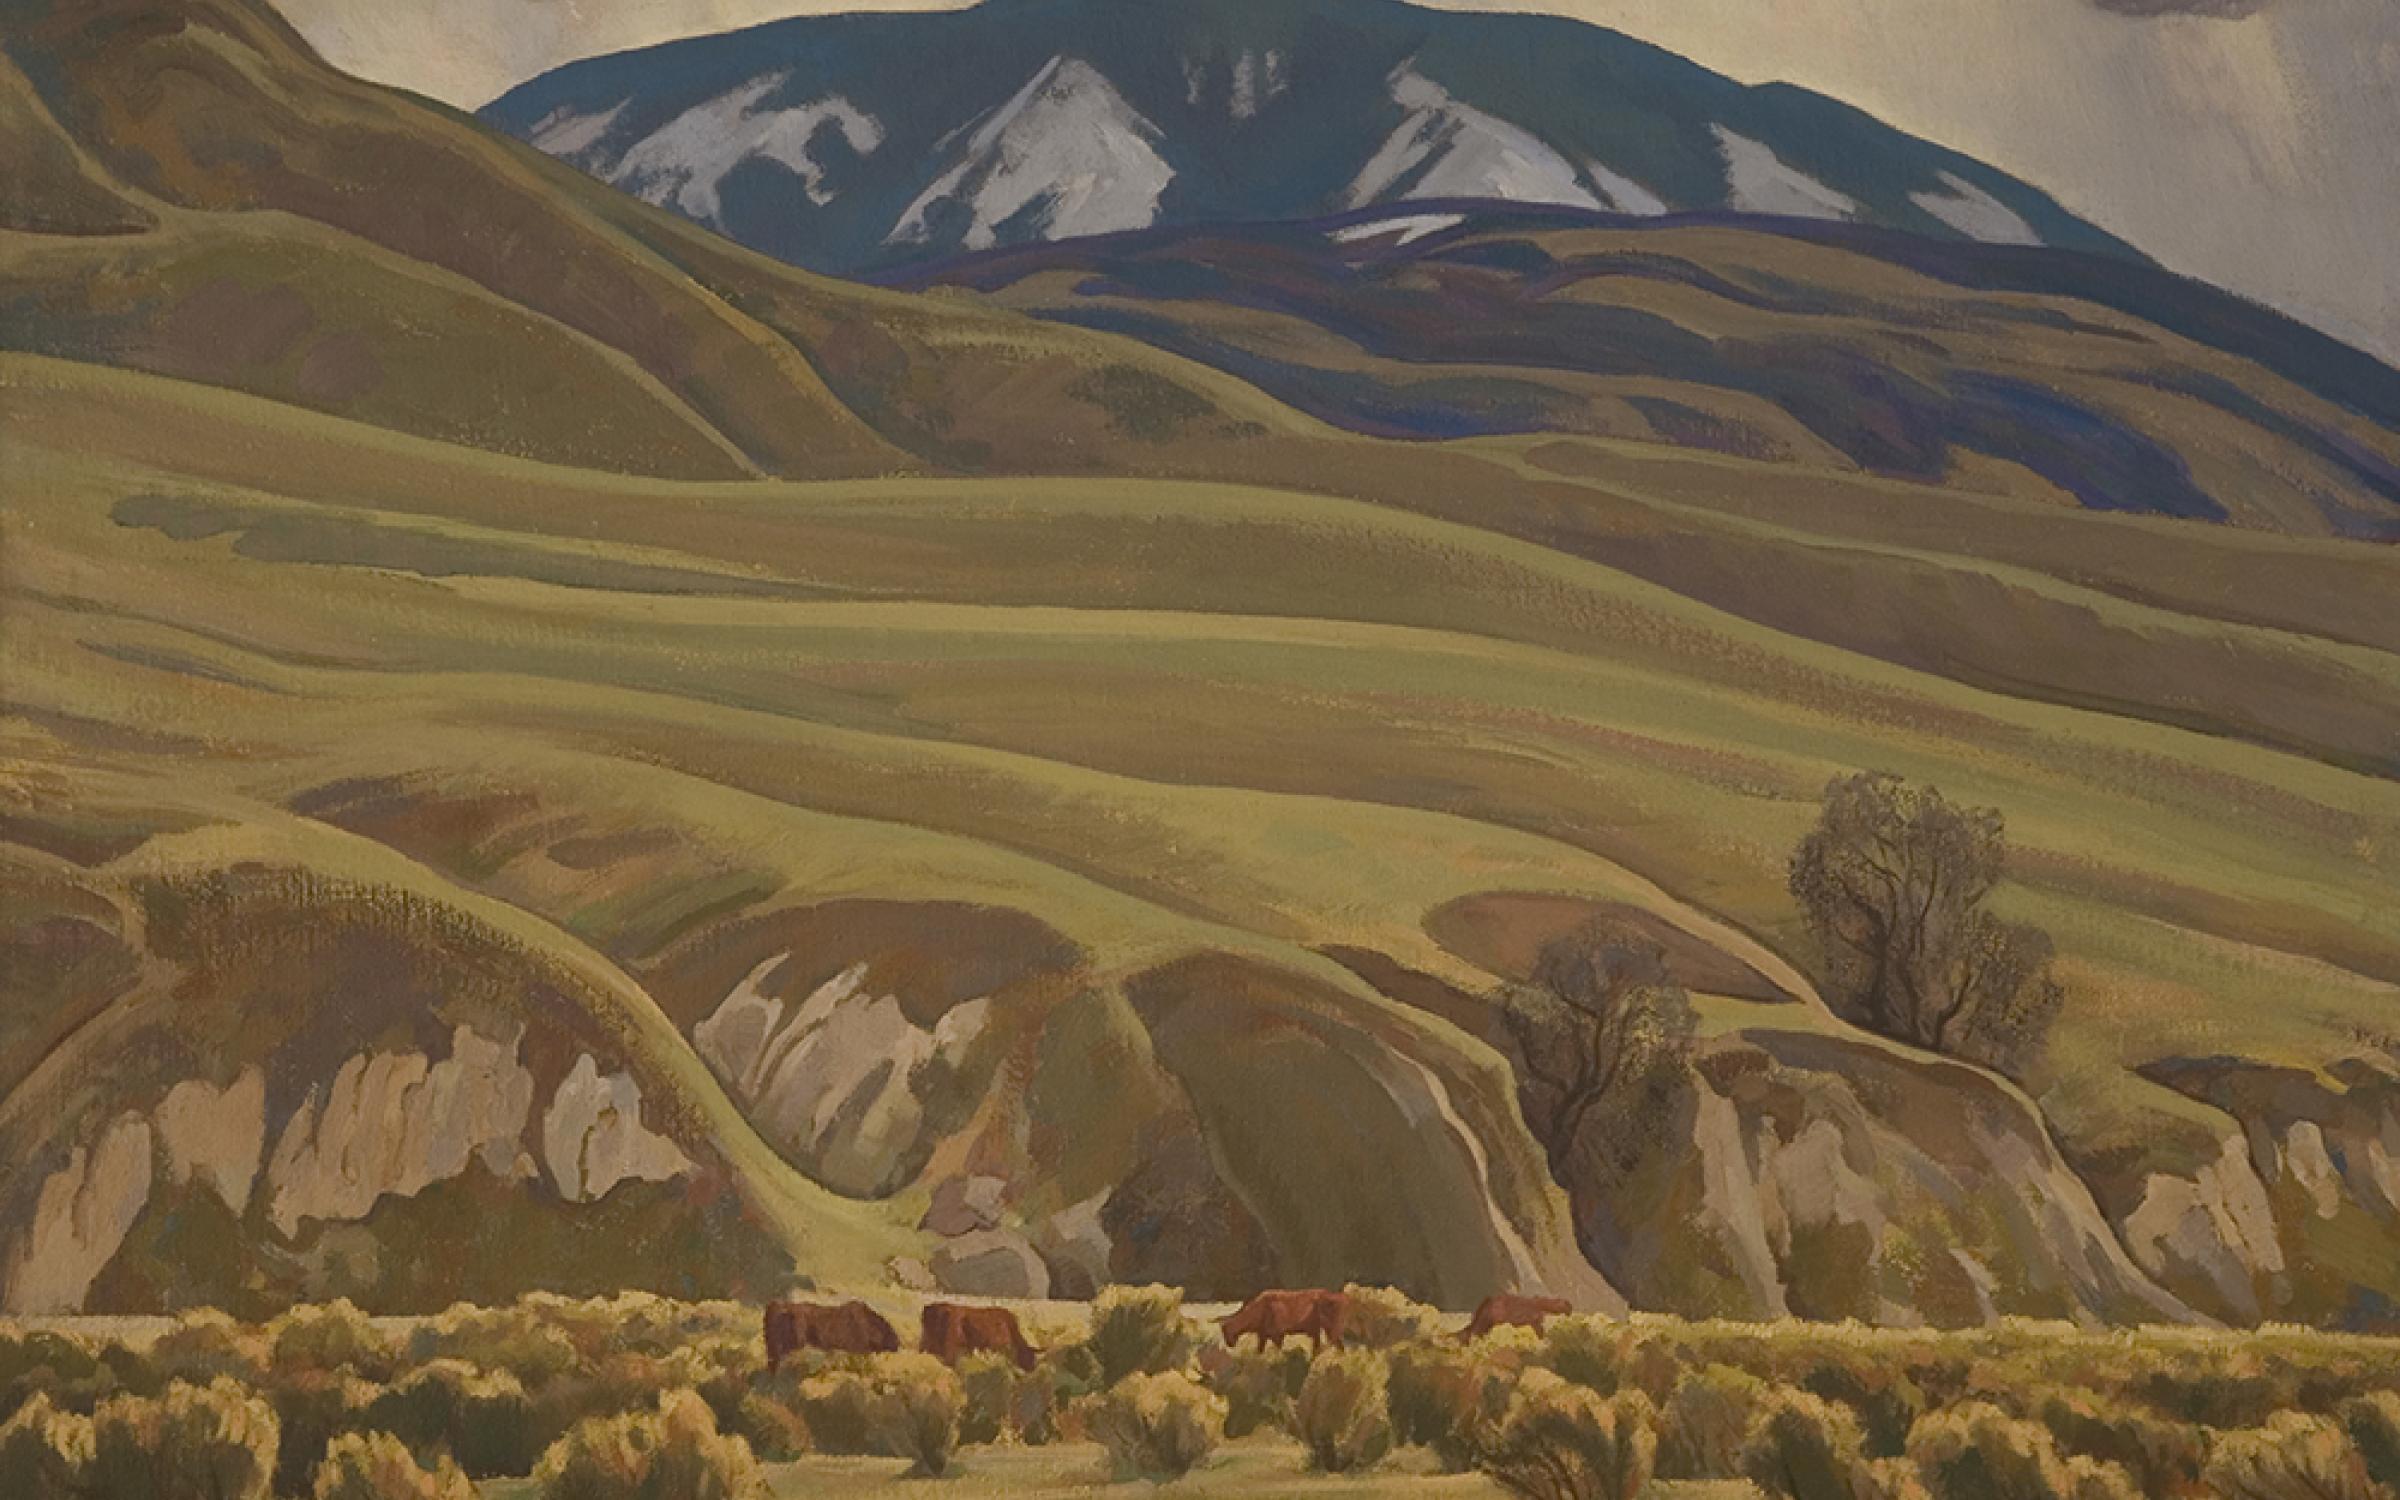 Maynard Dixon (American, 1875-1946) Springtime on Bear Mountain, 1930, Oil on canvas, Gift of Mr. and Mrs. Alan B. Blood, framed with funds from the Ann K. Stewart Docent and Volunteer Conservation Fund, UMFA1996.54.1